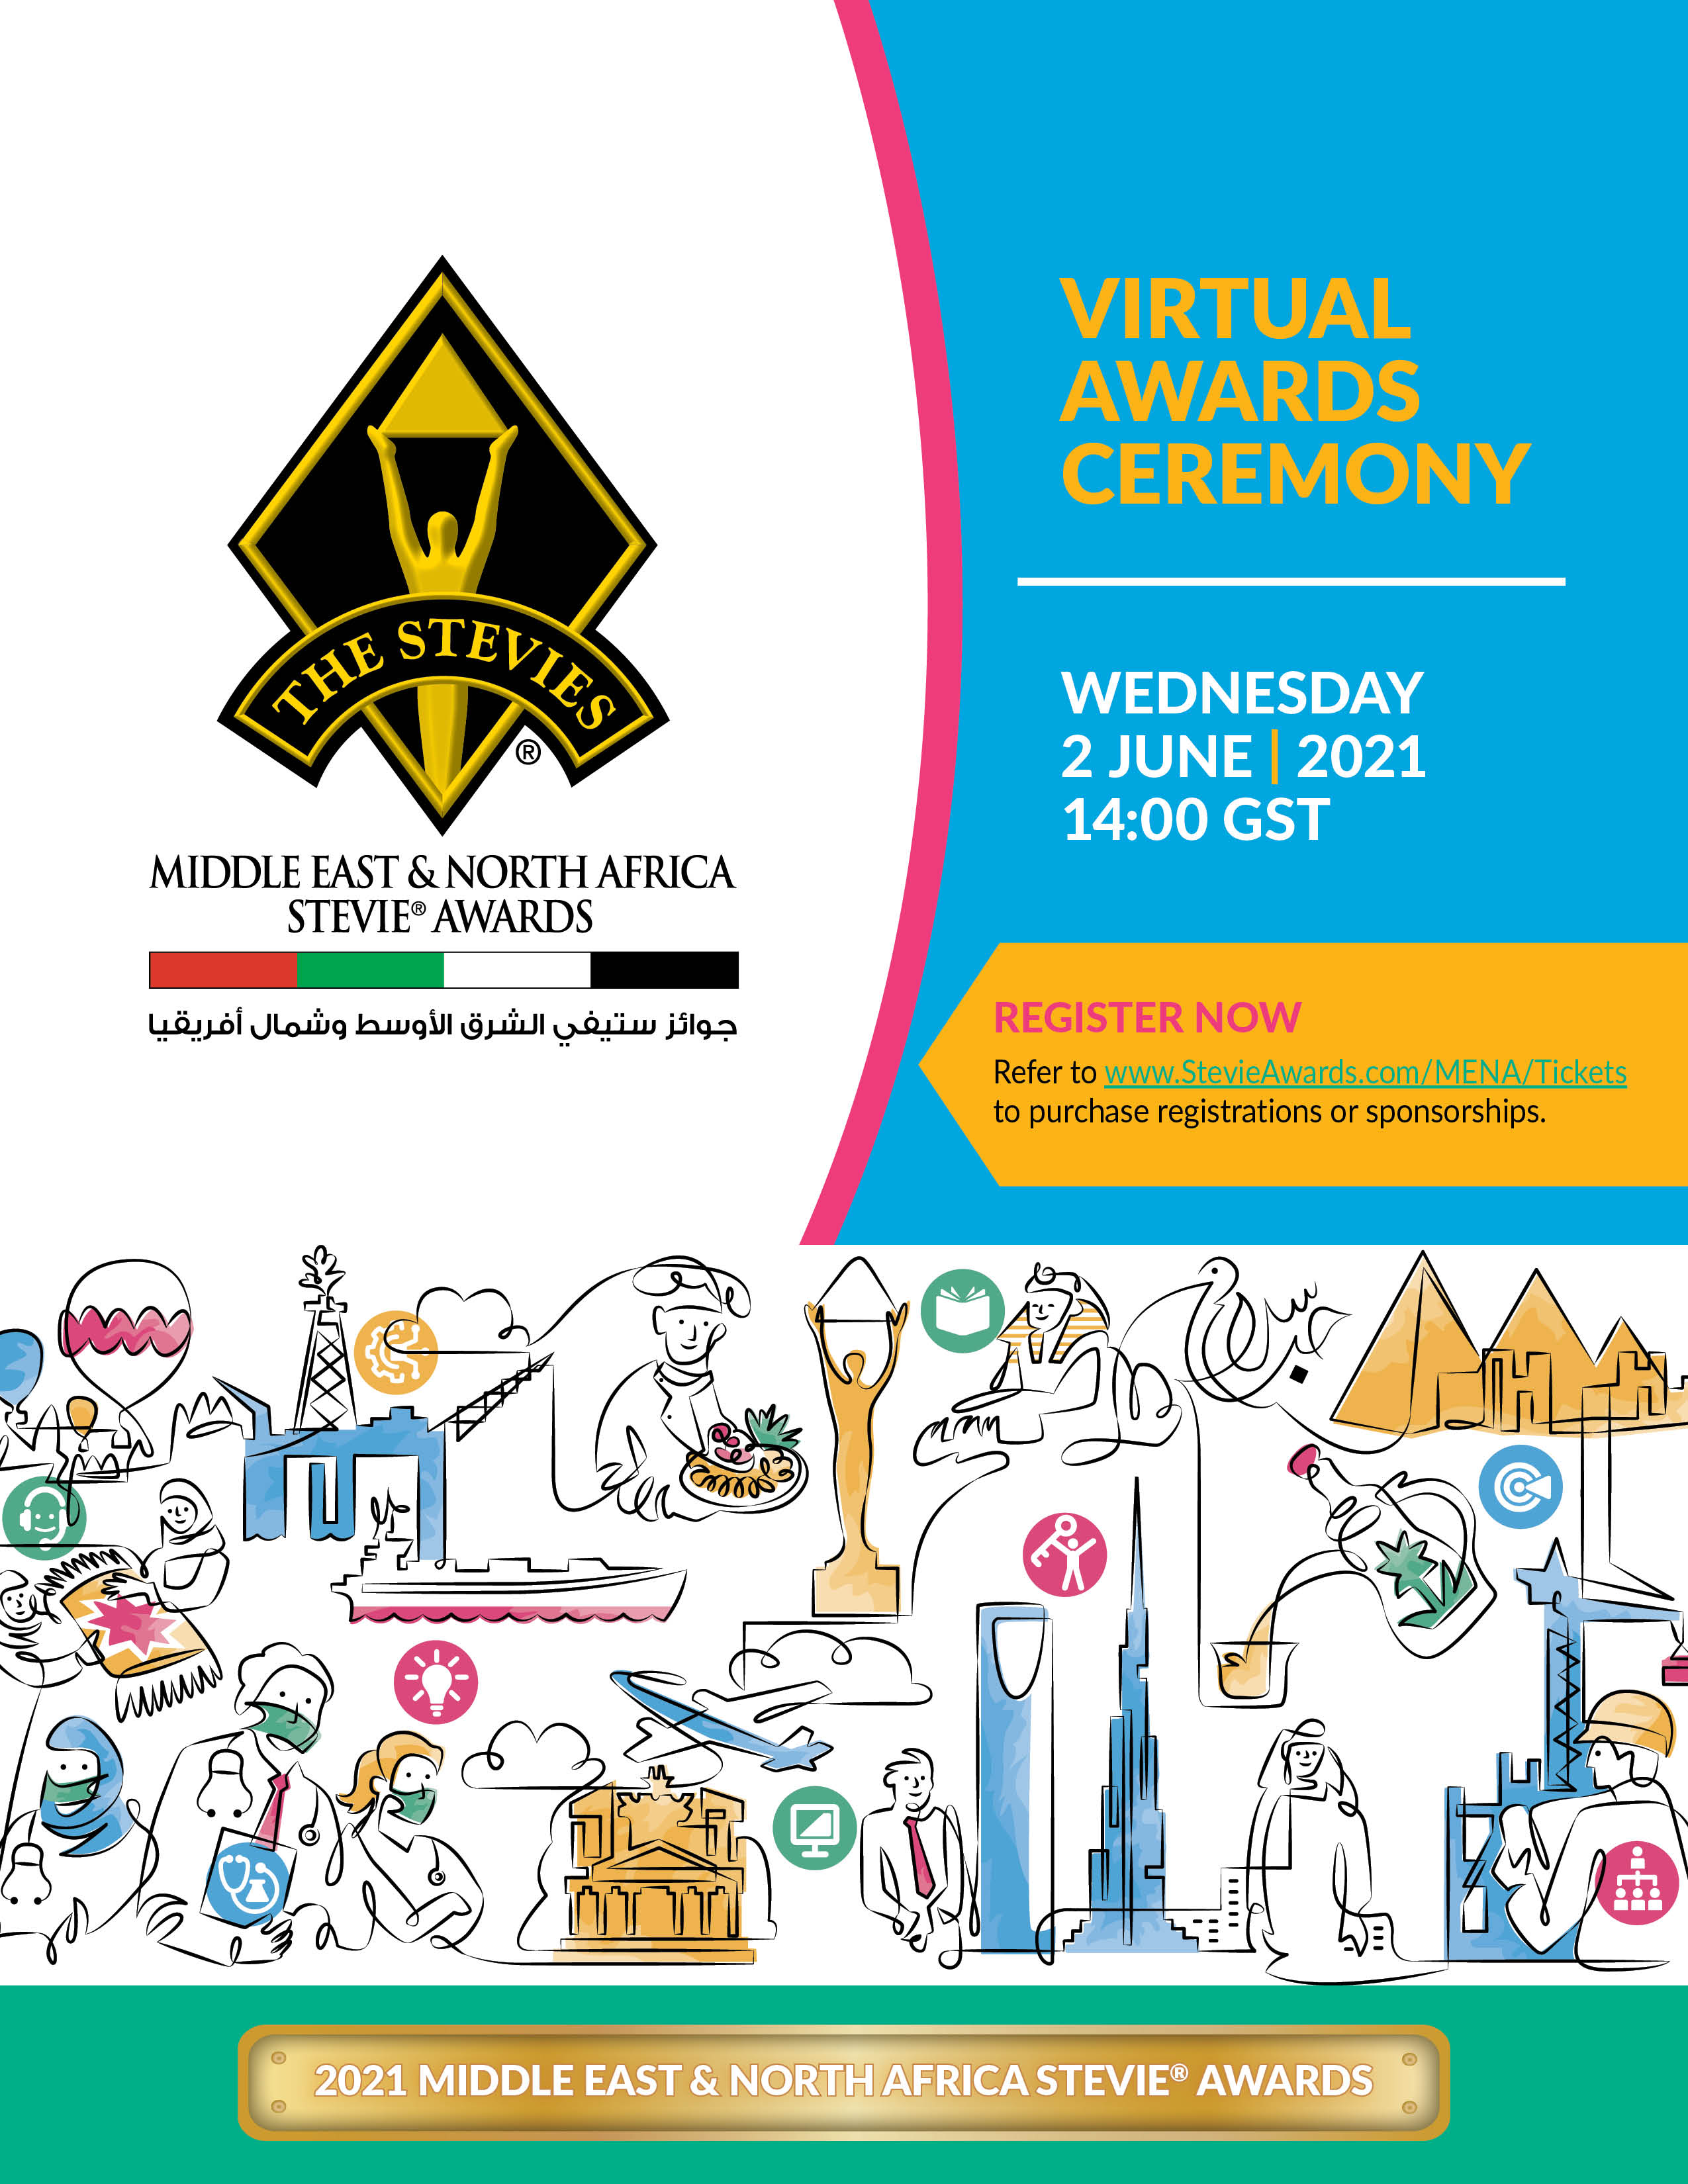 Attend the MESA21 virtual awards ceremony